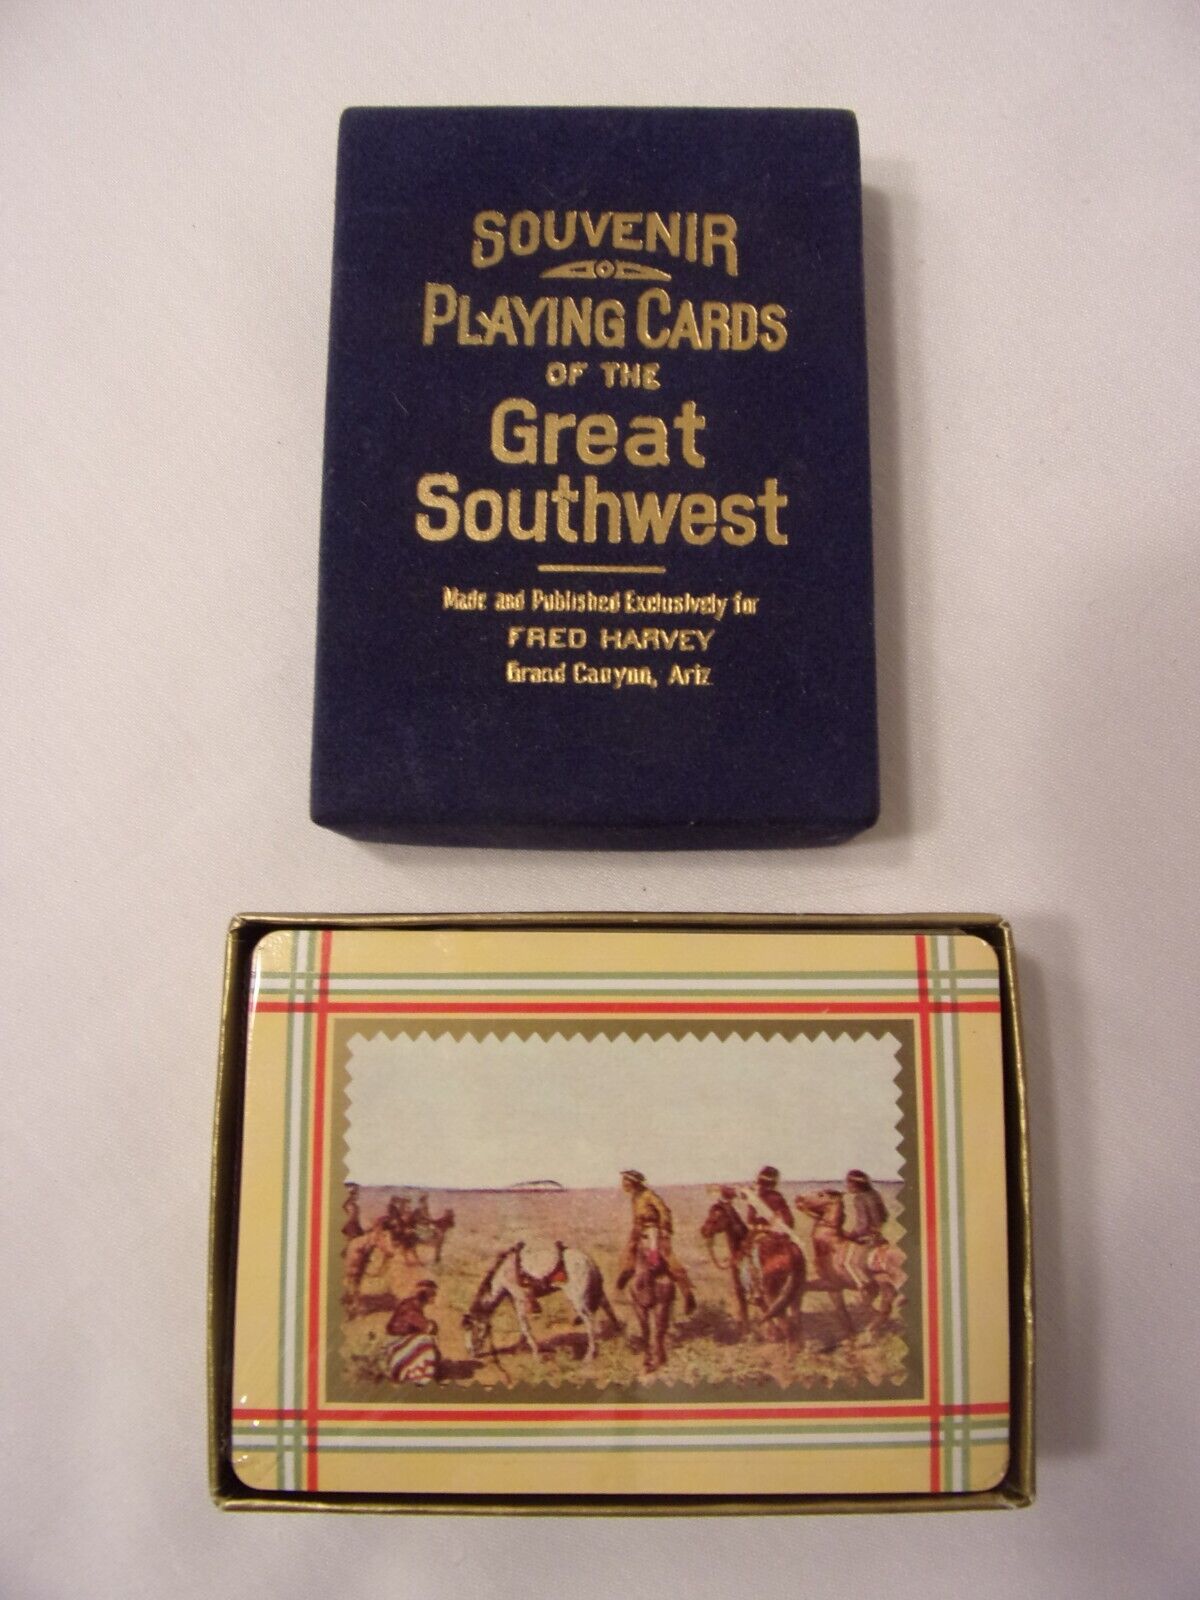 EXTREMELY RARE Sealed GREAT SOUTHWEST SOUVENIR PLAYING CARDS by FRED HARVEY